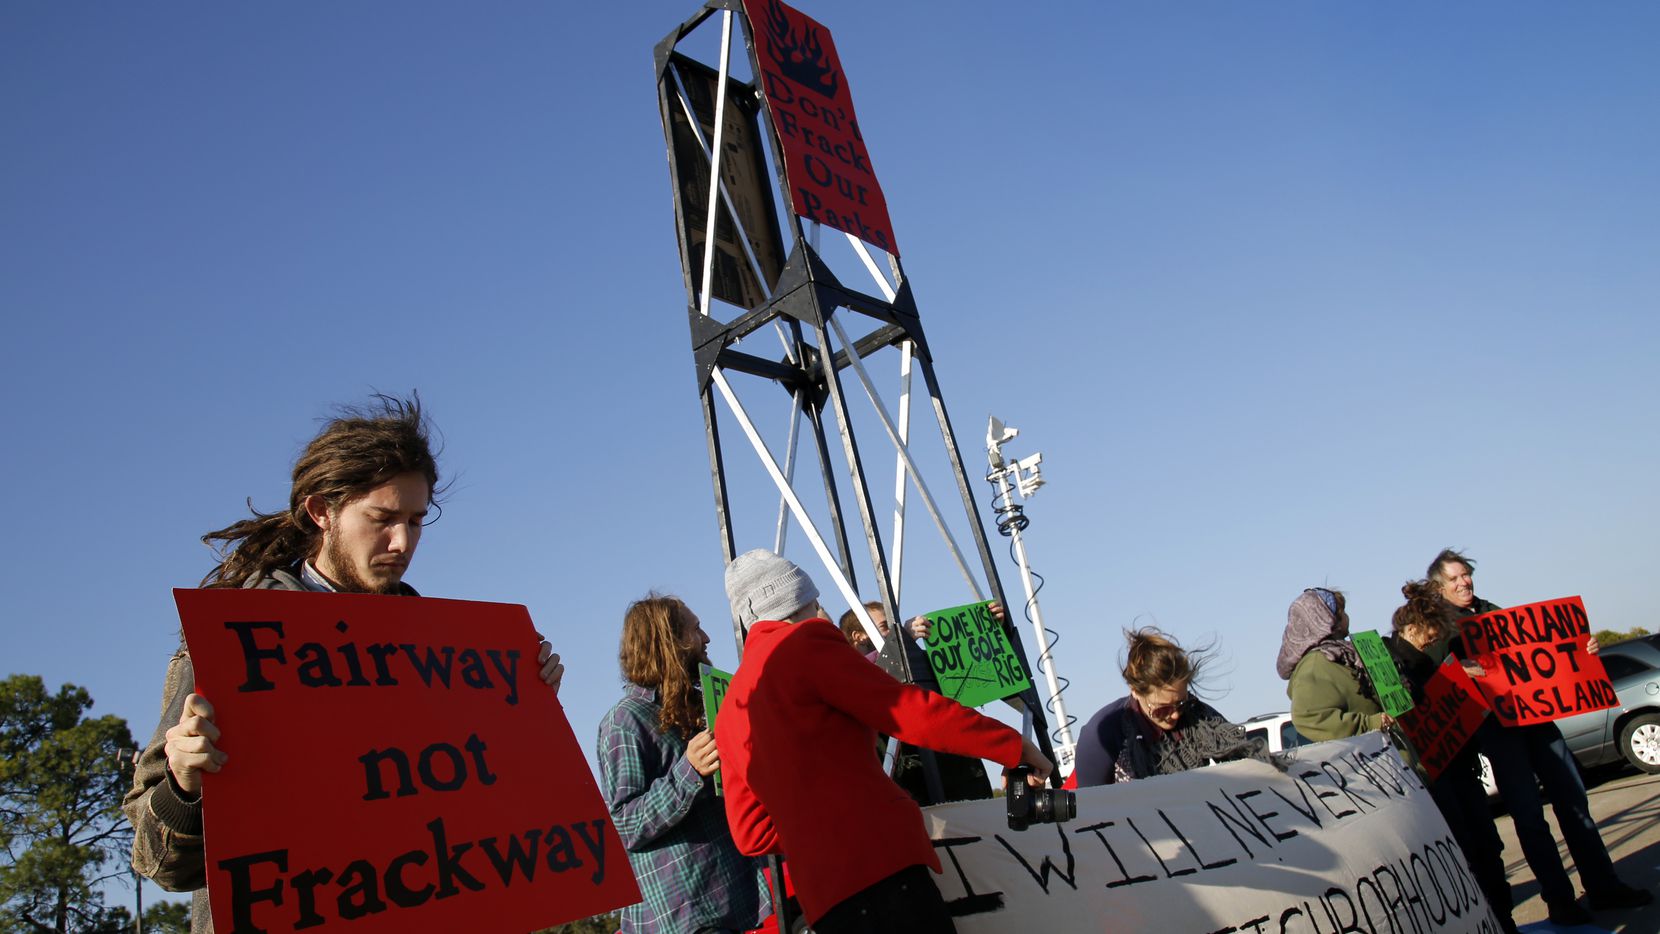 Protesters demonstrated during the city of Dallas' official Luna Vista Golf Course re-opening on October 26, 2012. This is near the land where Trinity East Energy had once hoped to drill for natural gas.